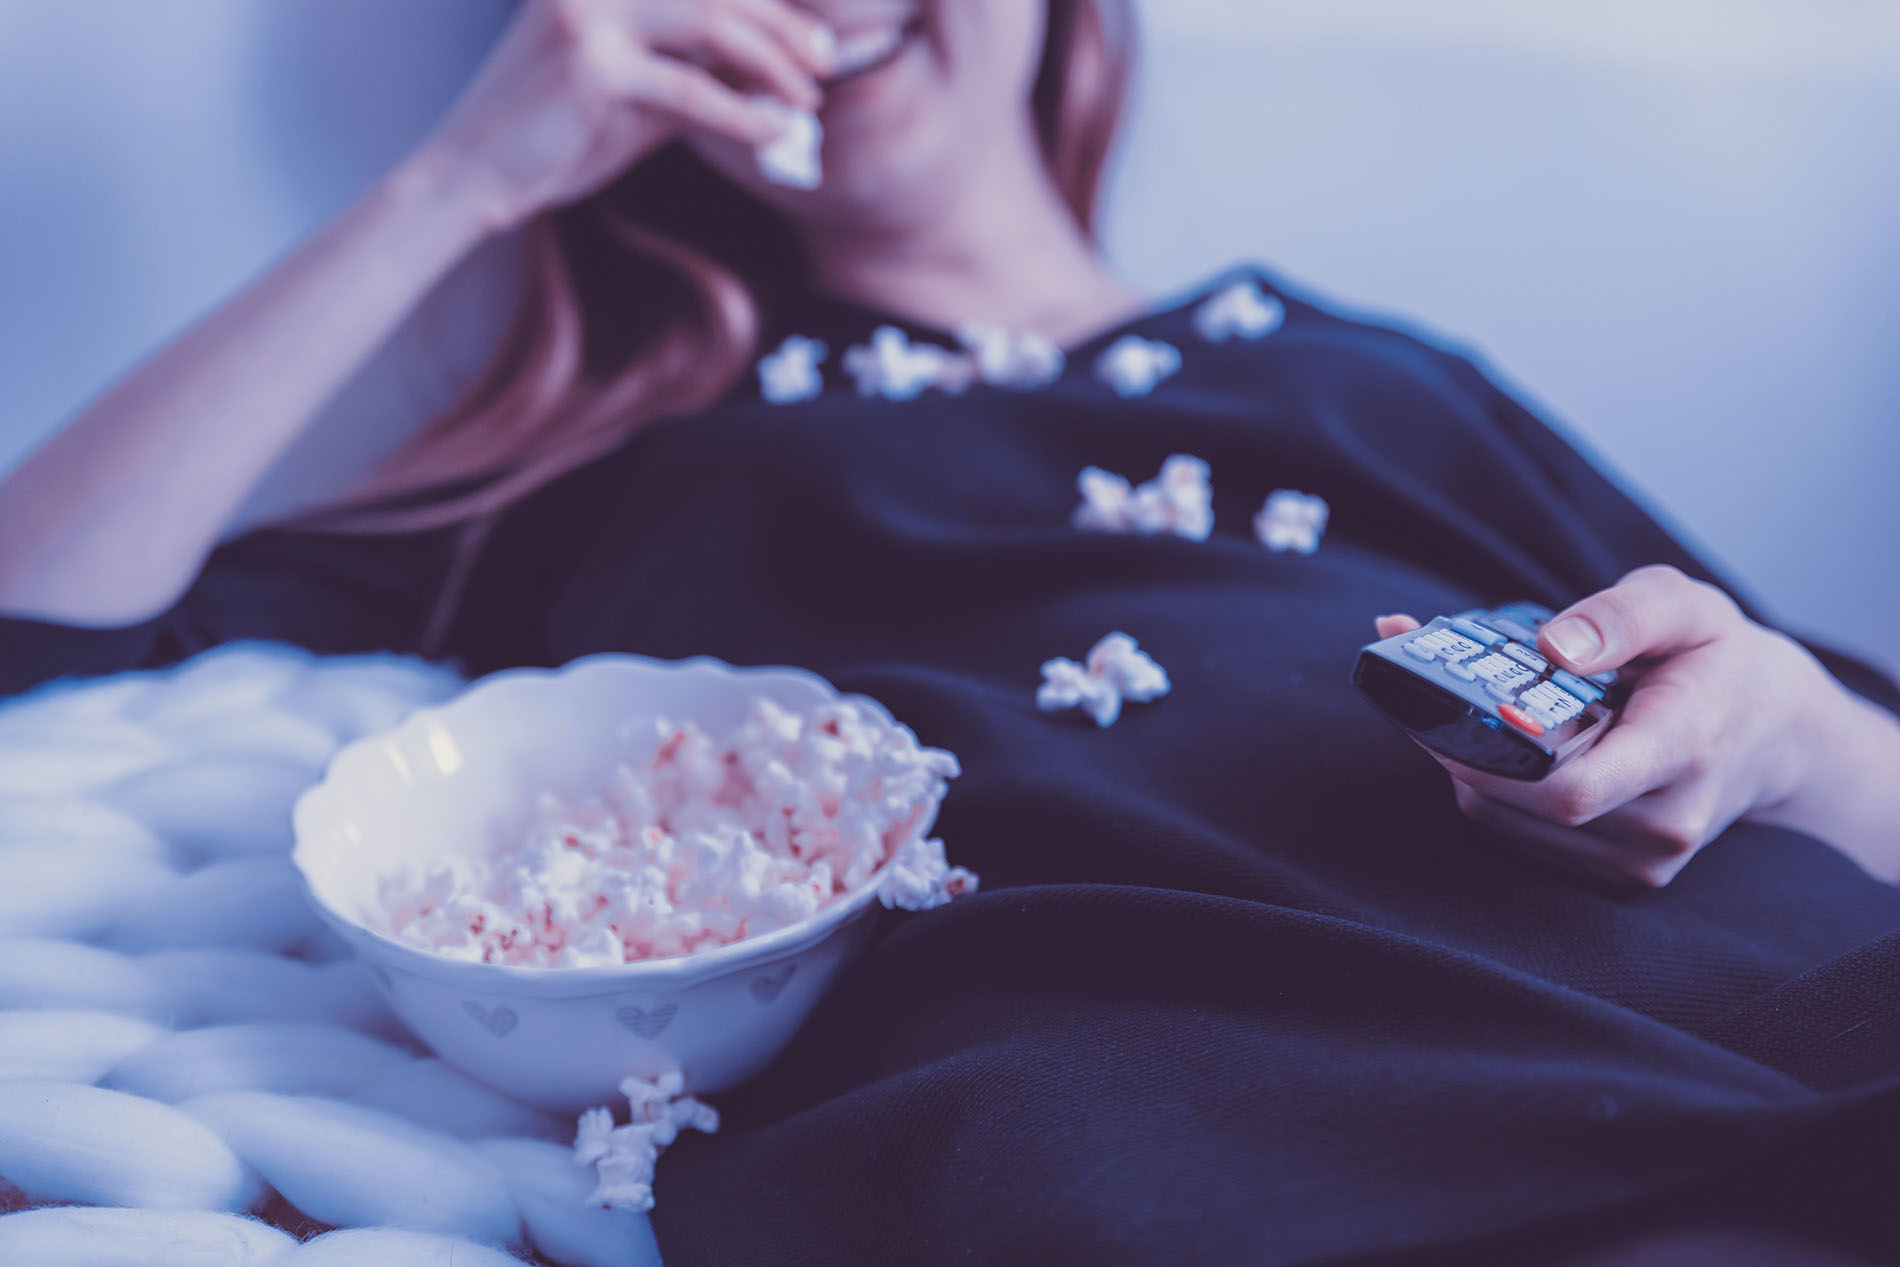 A woman laying down, eating popcorn with a remote in her hand.